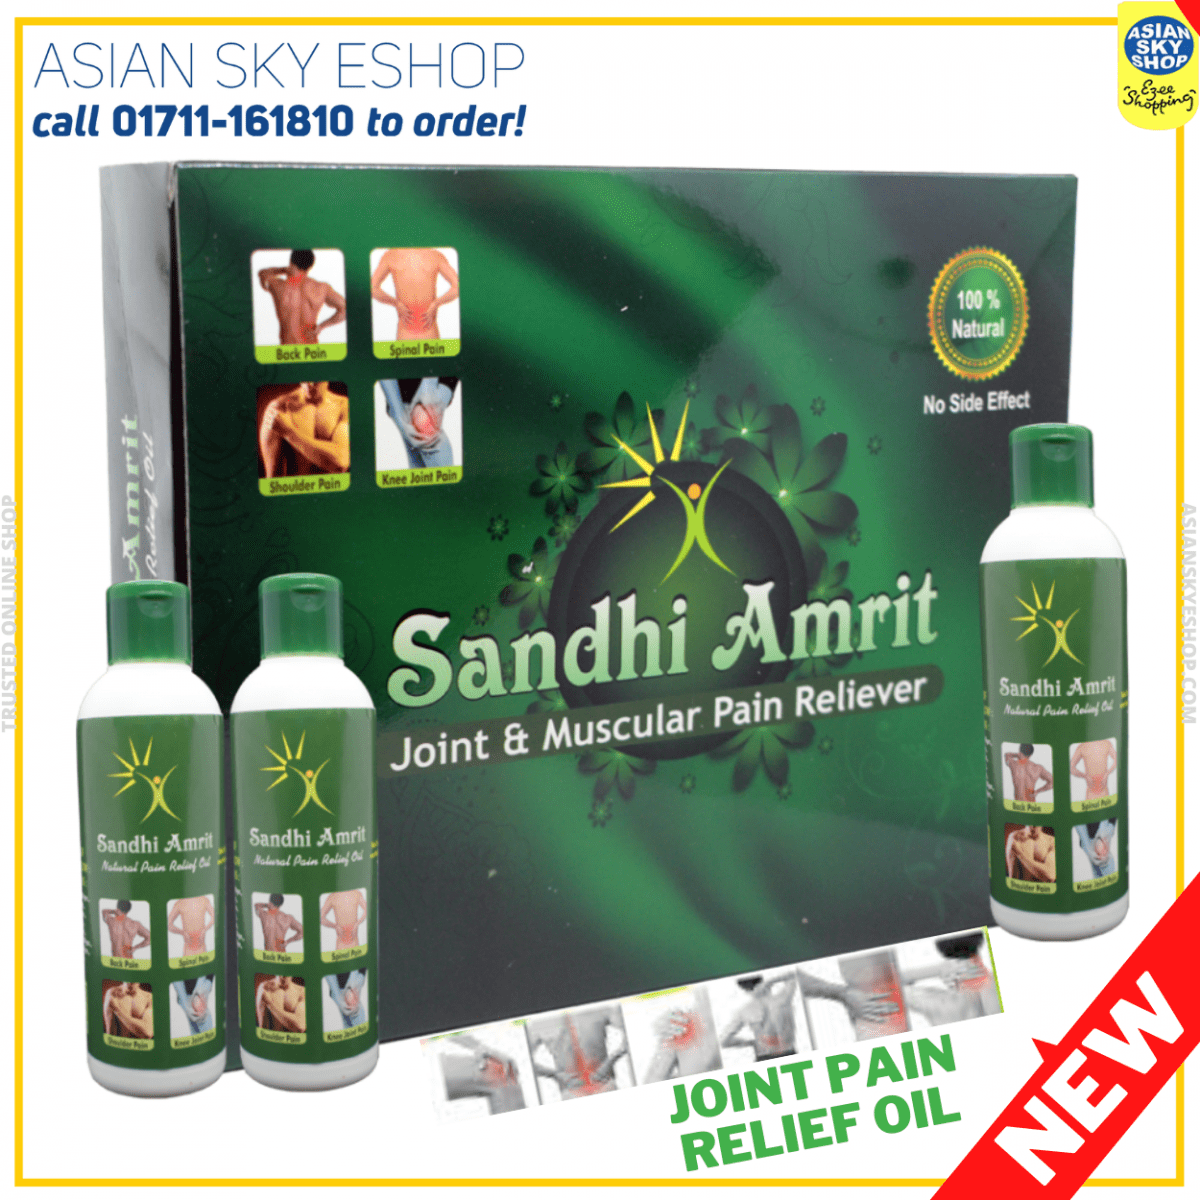 Sandhi Amrit 100% Natural herbal Joint & Muscular Pain Reliever